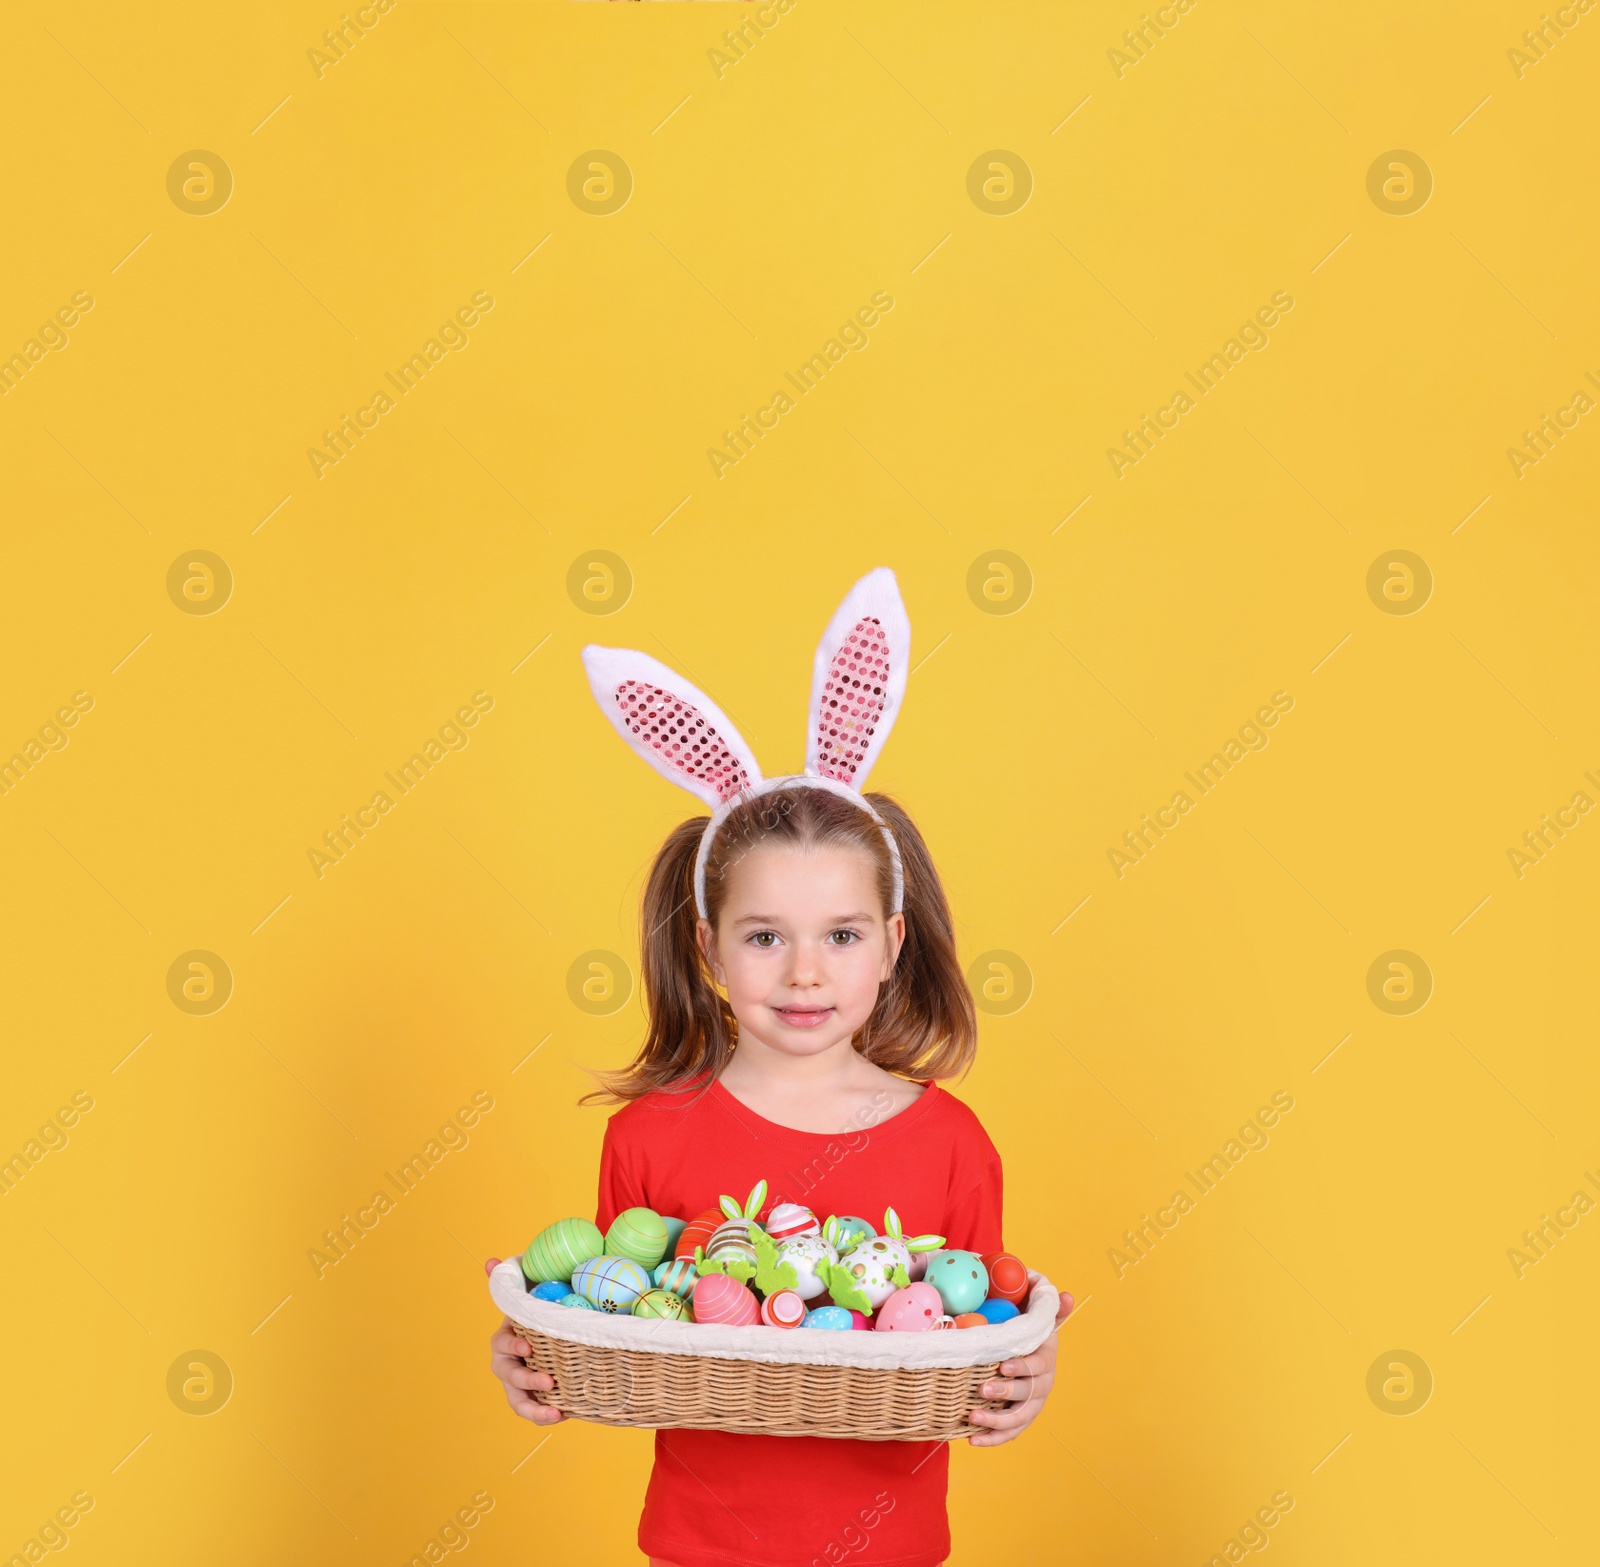 Photo of Adorable little girl with bunny ears holding wicker basket full of Easter eggs on orange background